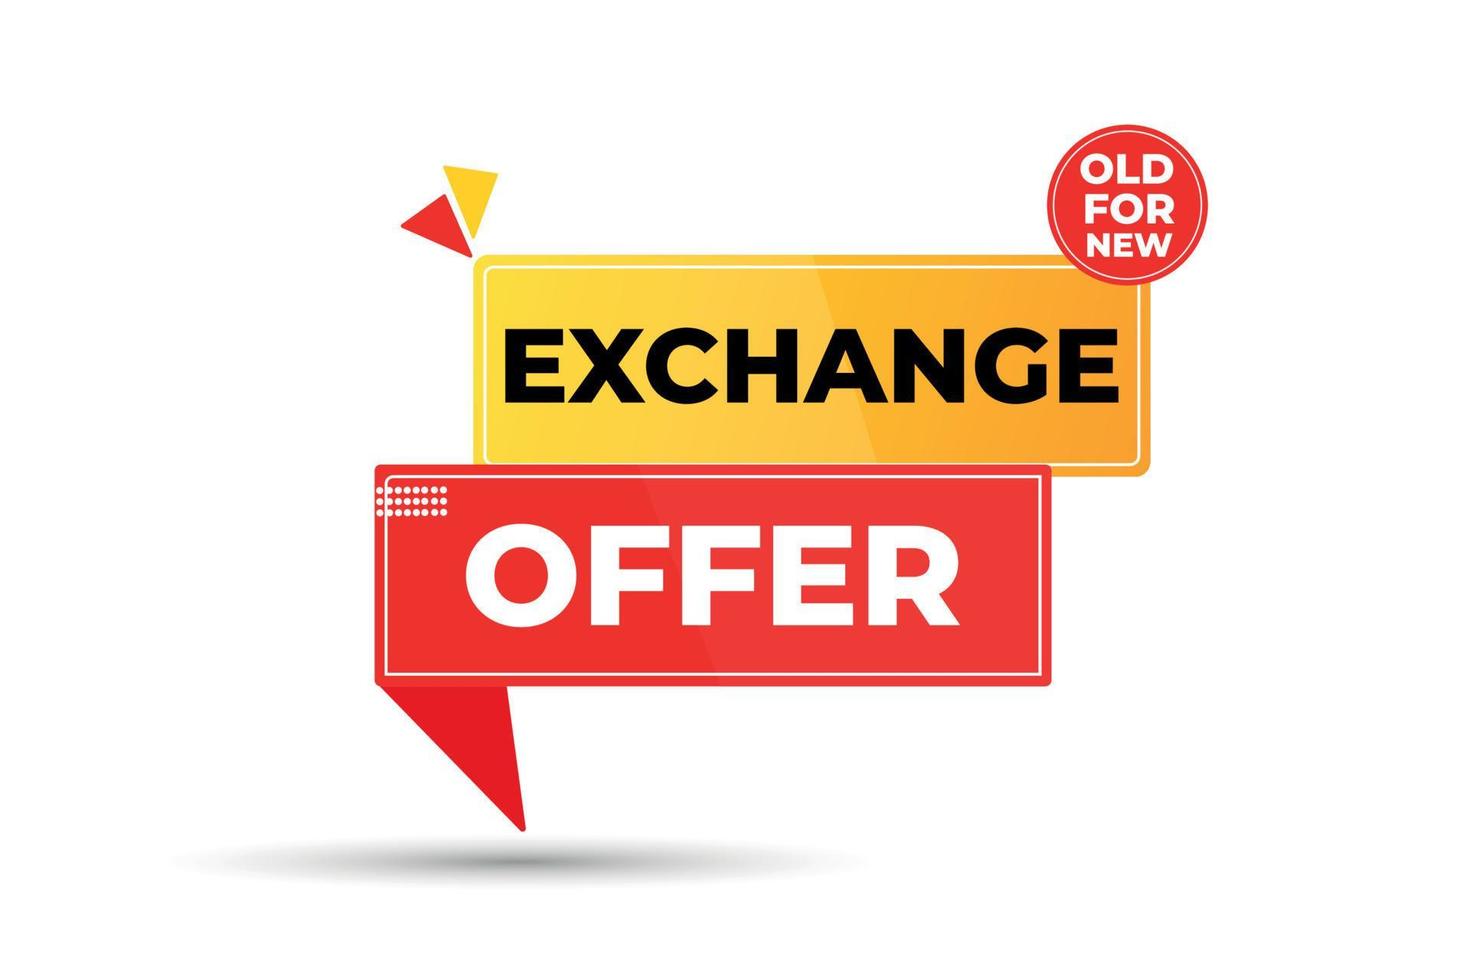 Exchange offer old product for new design for business promotion vector